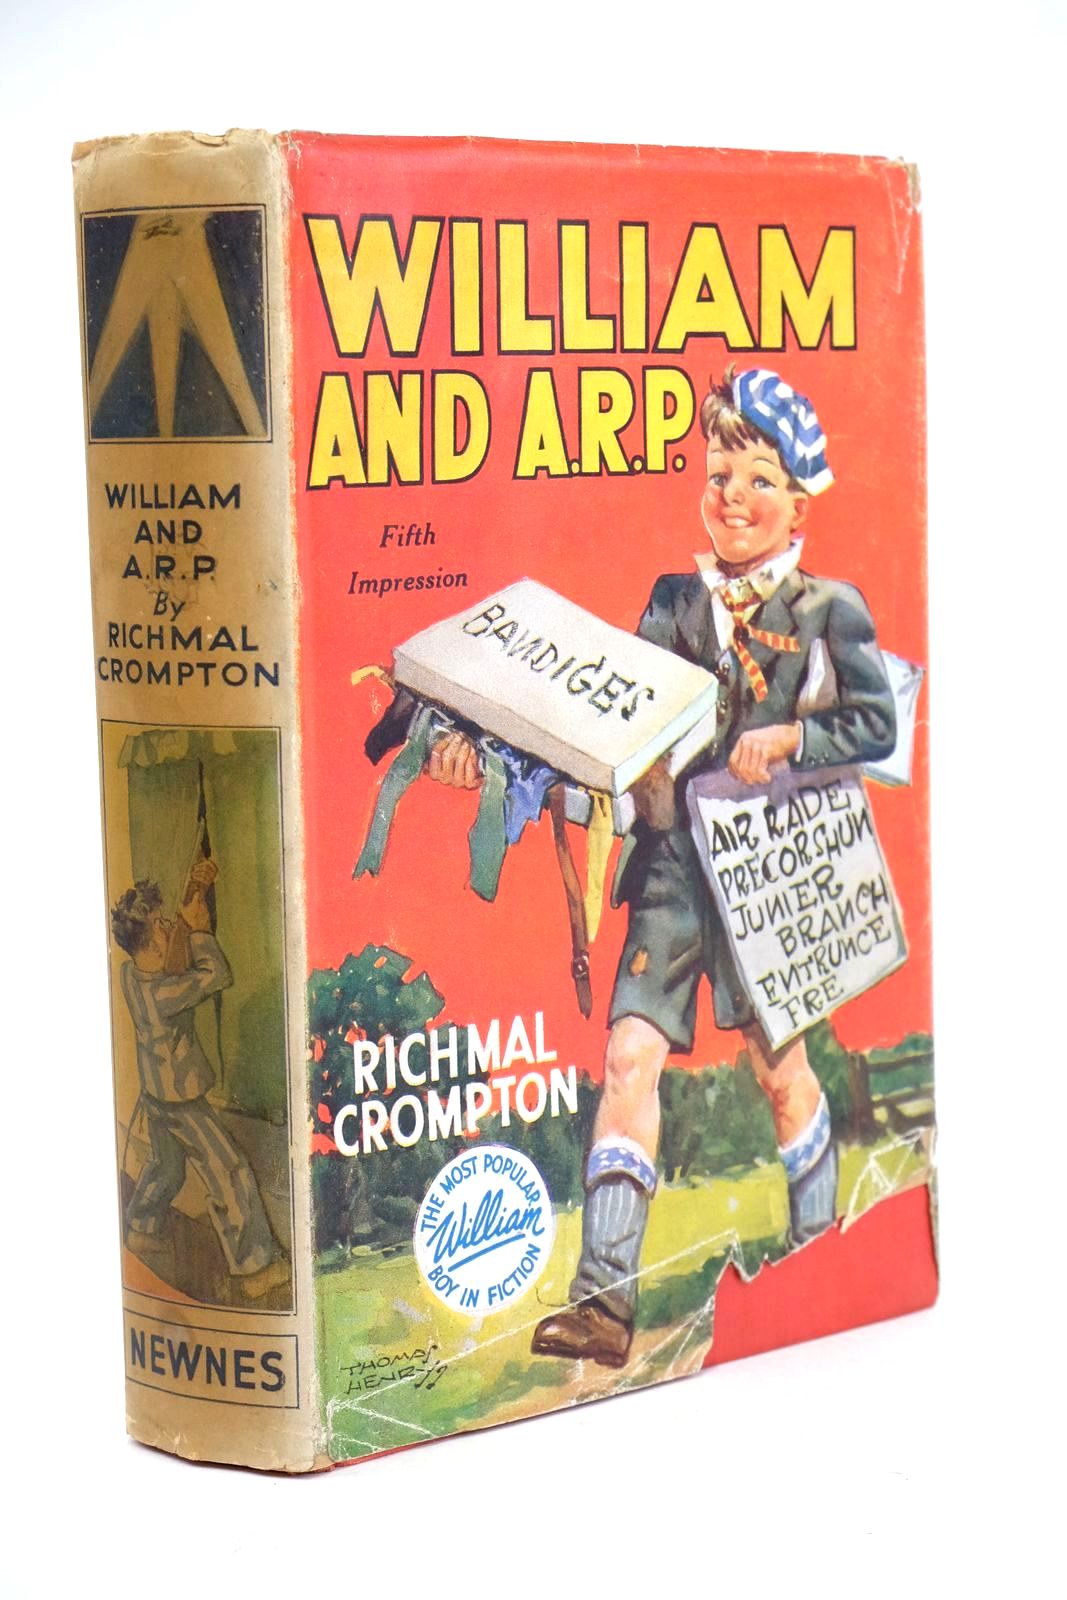 Photo of WILLIAM AND A.R.P. written by Crompton, Richmal illustrated by Henry, Thomas published by George Newnes Ltd. (STOCK CODE: 1324571)  for sale by Stella & Rose's Books